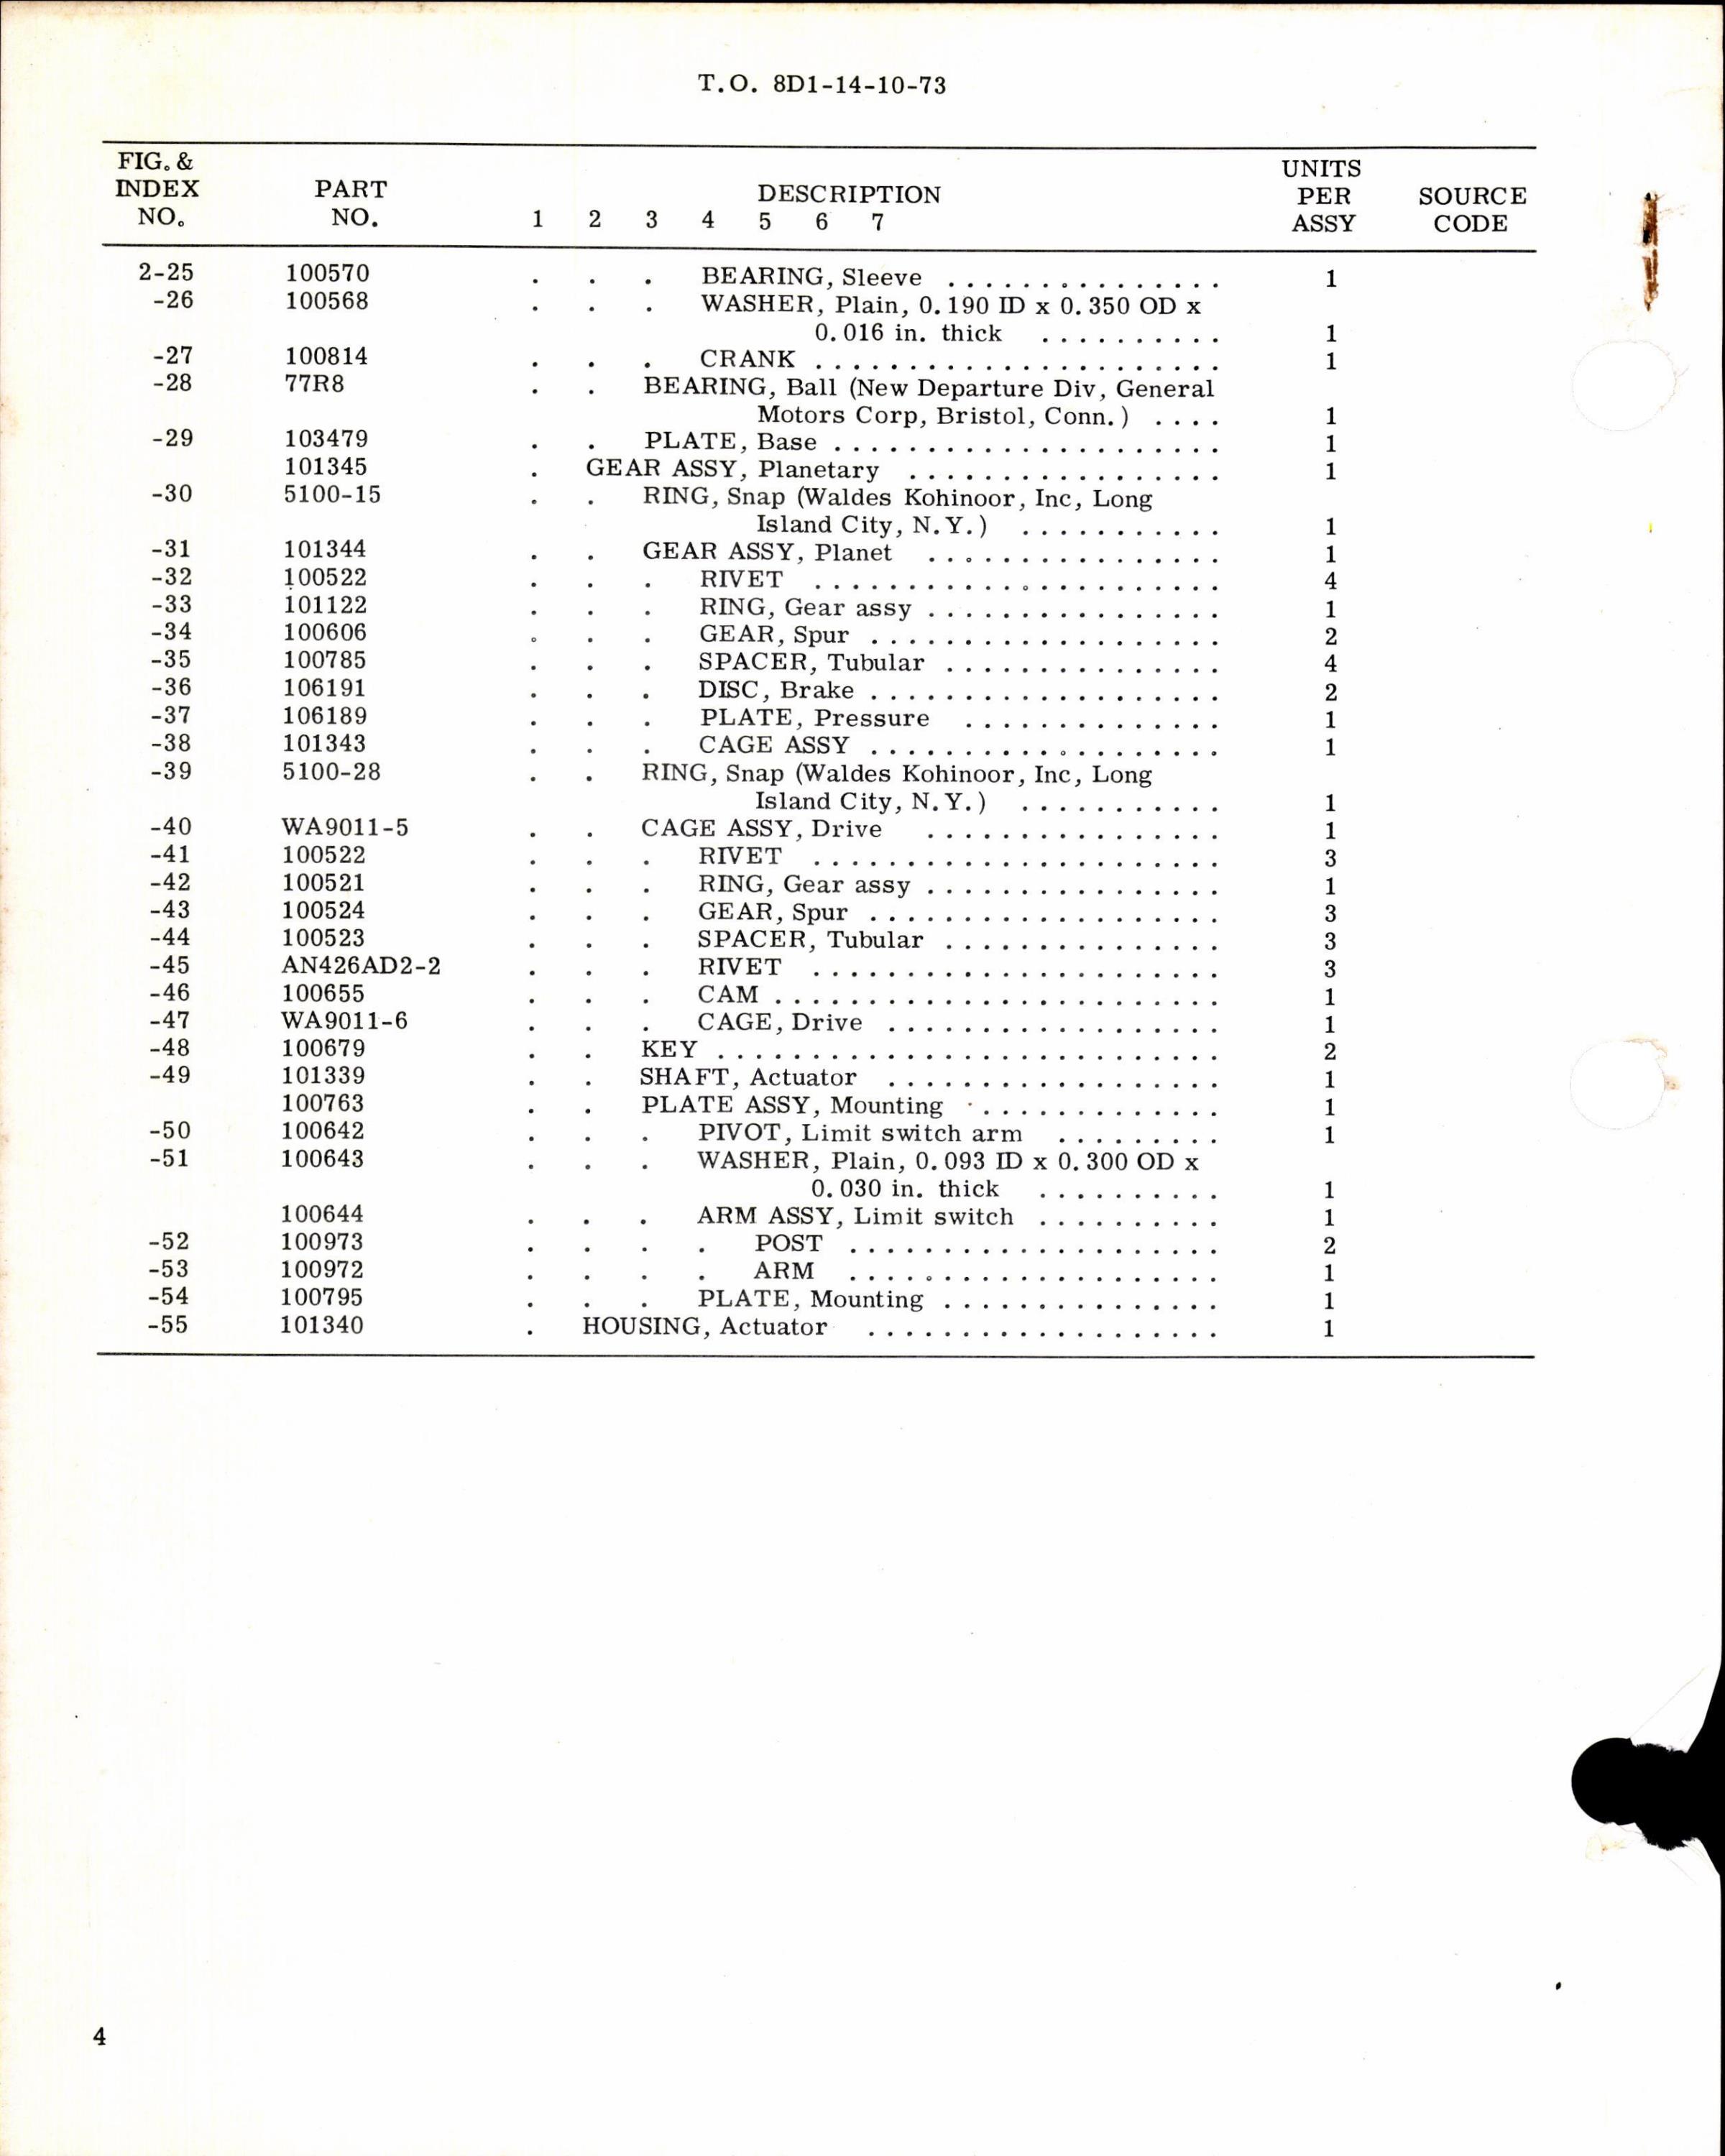 Sample page 4 from AirCorps Library document: Instructions w Parts Breakdown for Actuator Assembly Part 106332